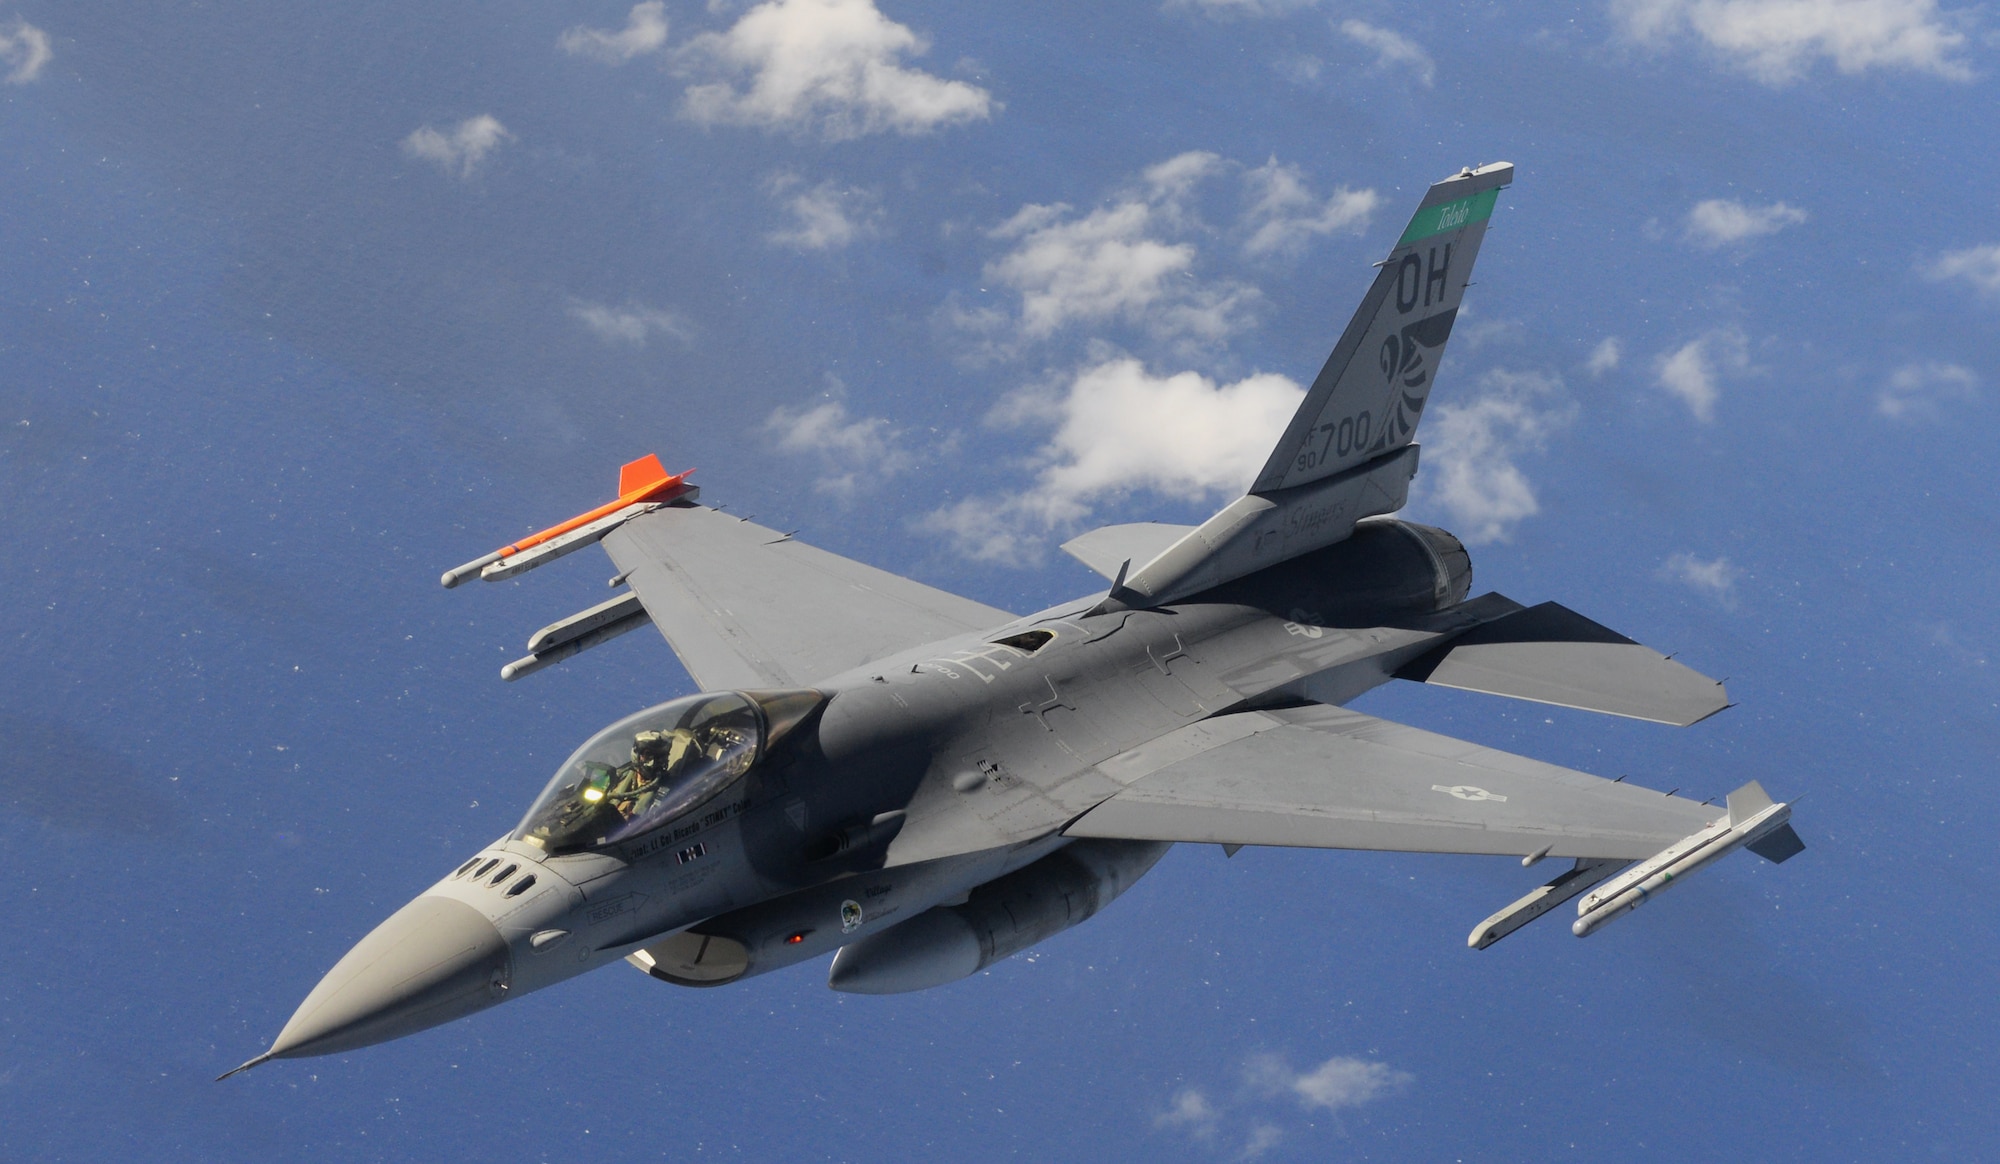 Maj. Curtis Voltz, 112th Expeditionary Fighter Squadron, Ohio Air National Guard chief of weapons and tactics, pilots an F-16 Fighting Falcon during a training mission Feb. 2, 2016 over the Pacific Ocean. Deployed here as part of the Theater Security Package, the 112th EFS provides combat fighter assets to augment forces already operating in the Pacific theater. (U.S. Air Force photo/Senior Airman Joshua Smoot)